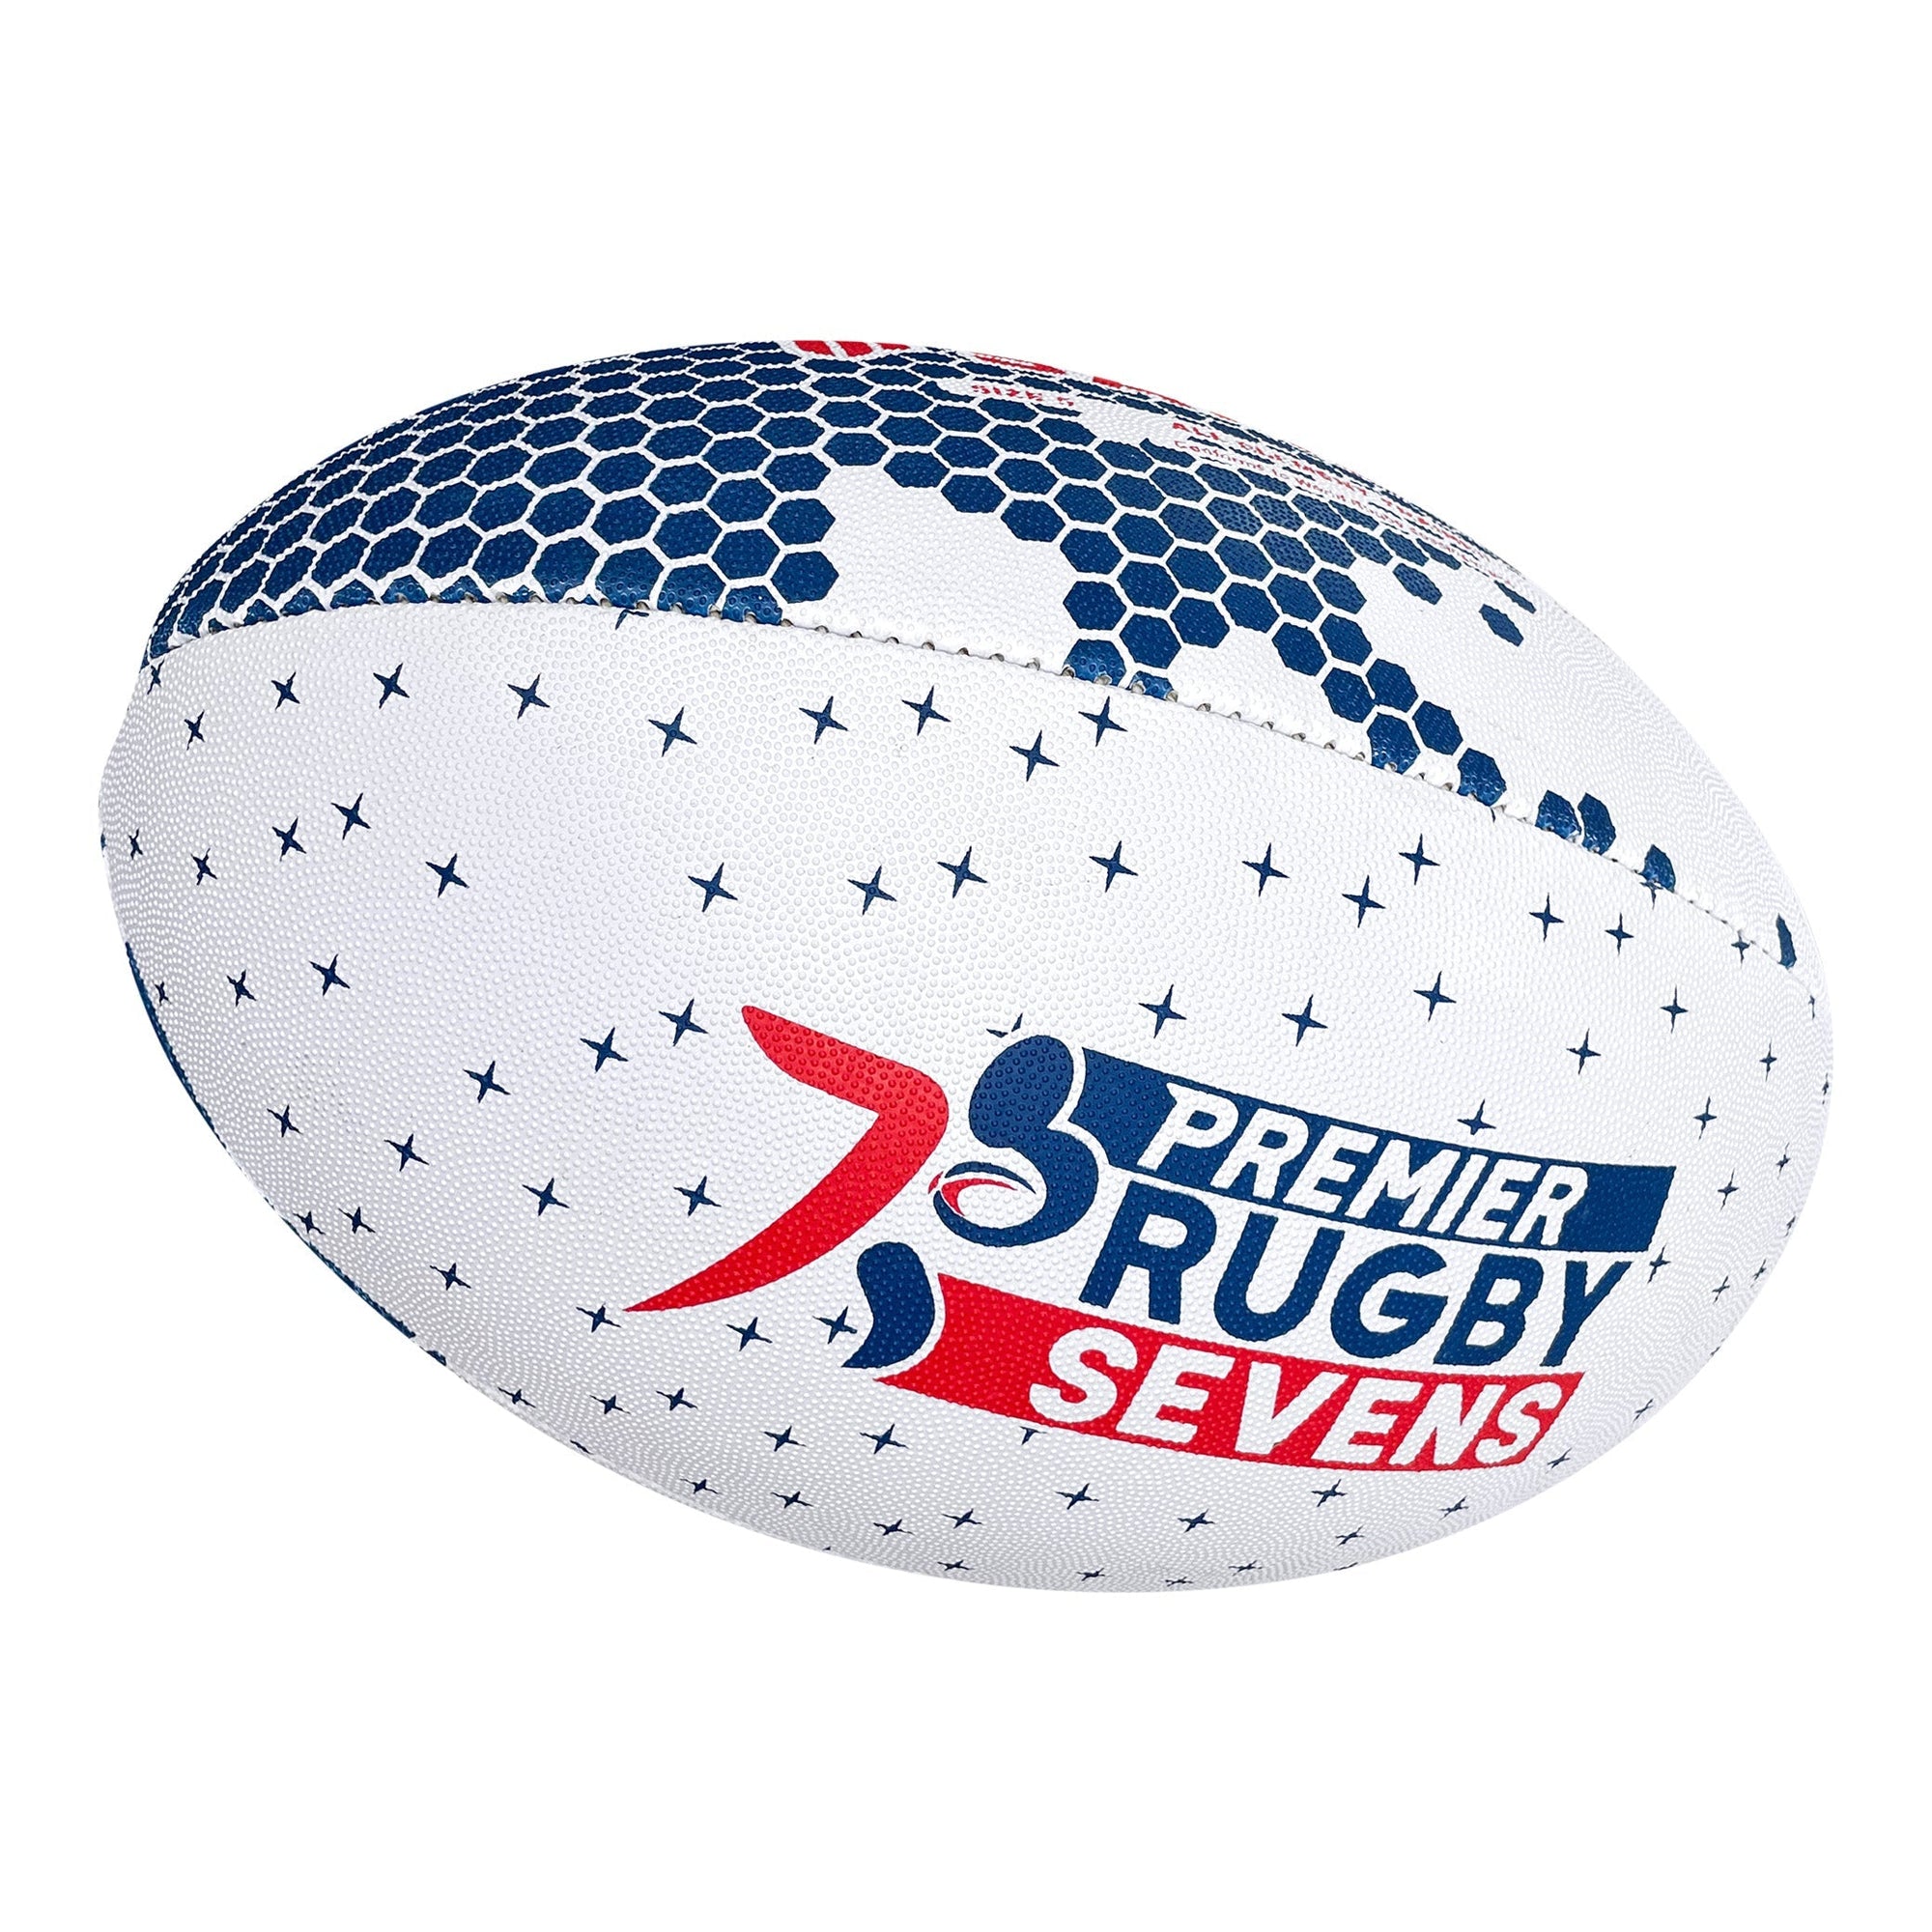 Rugby Imports PR7s 2022 Logo Trainer Ball